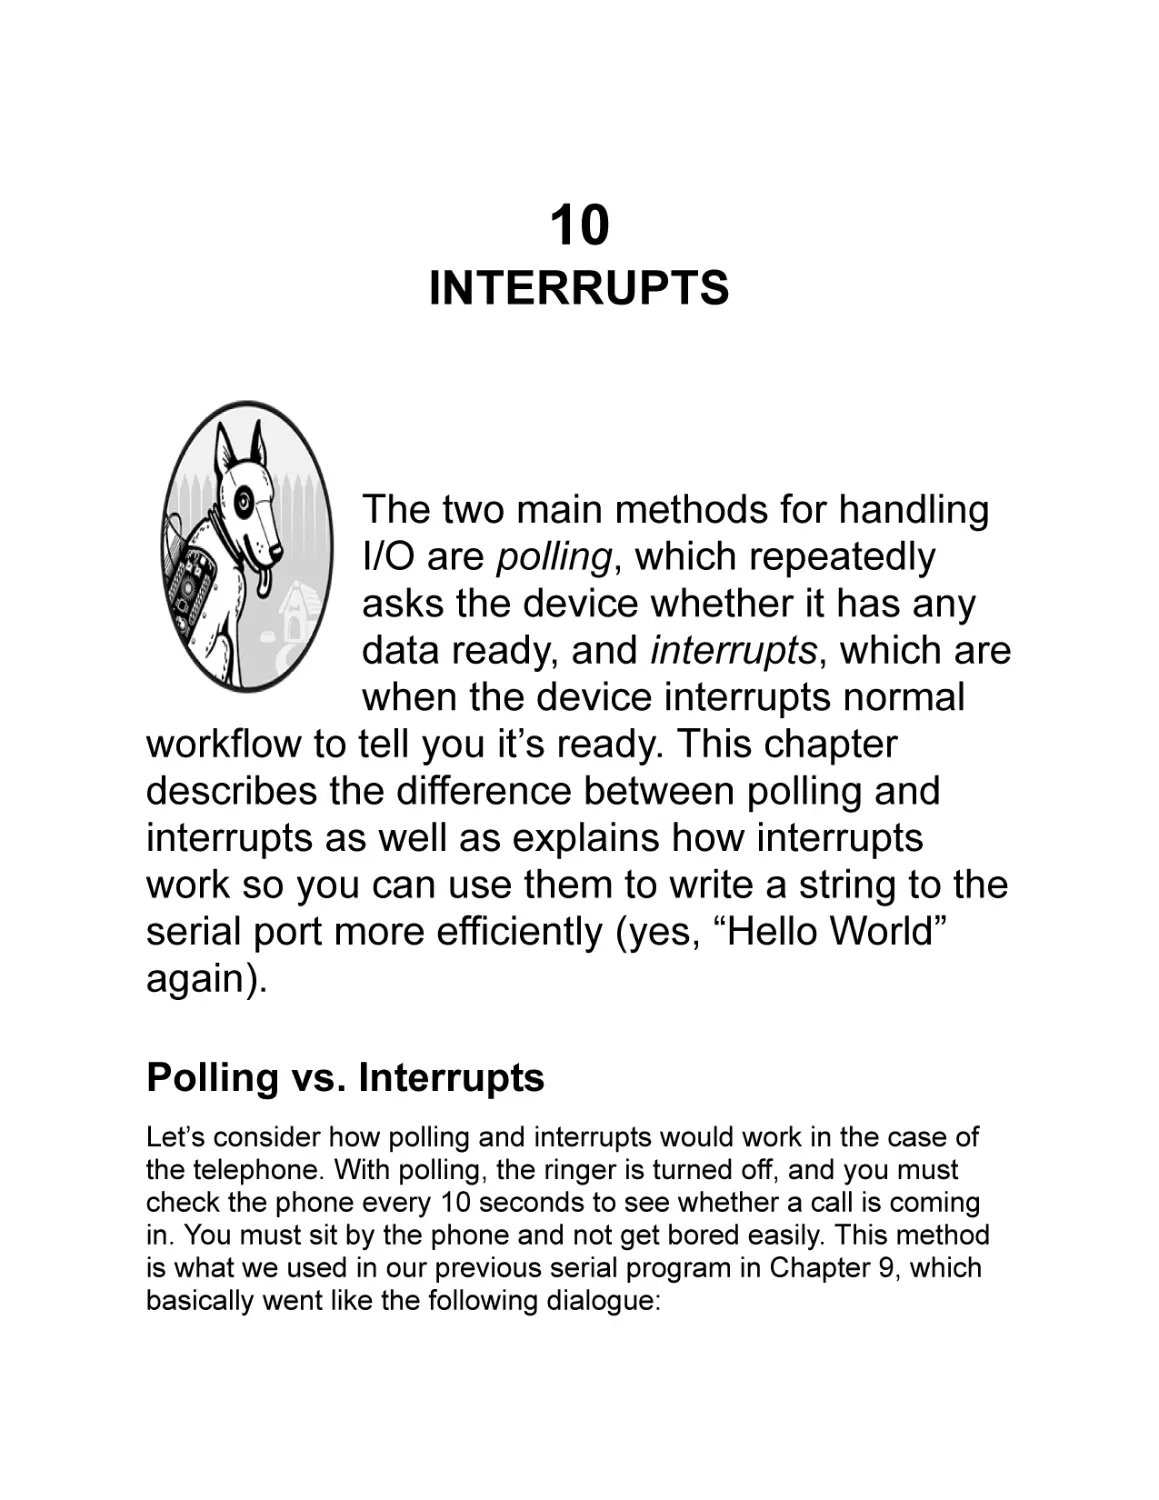 Chapter 10
Polling vs. Interrupts